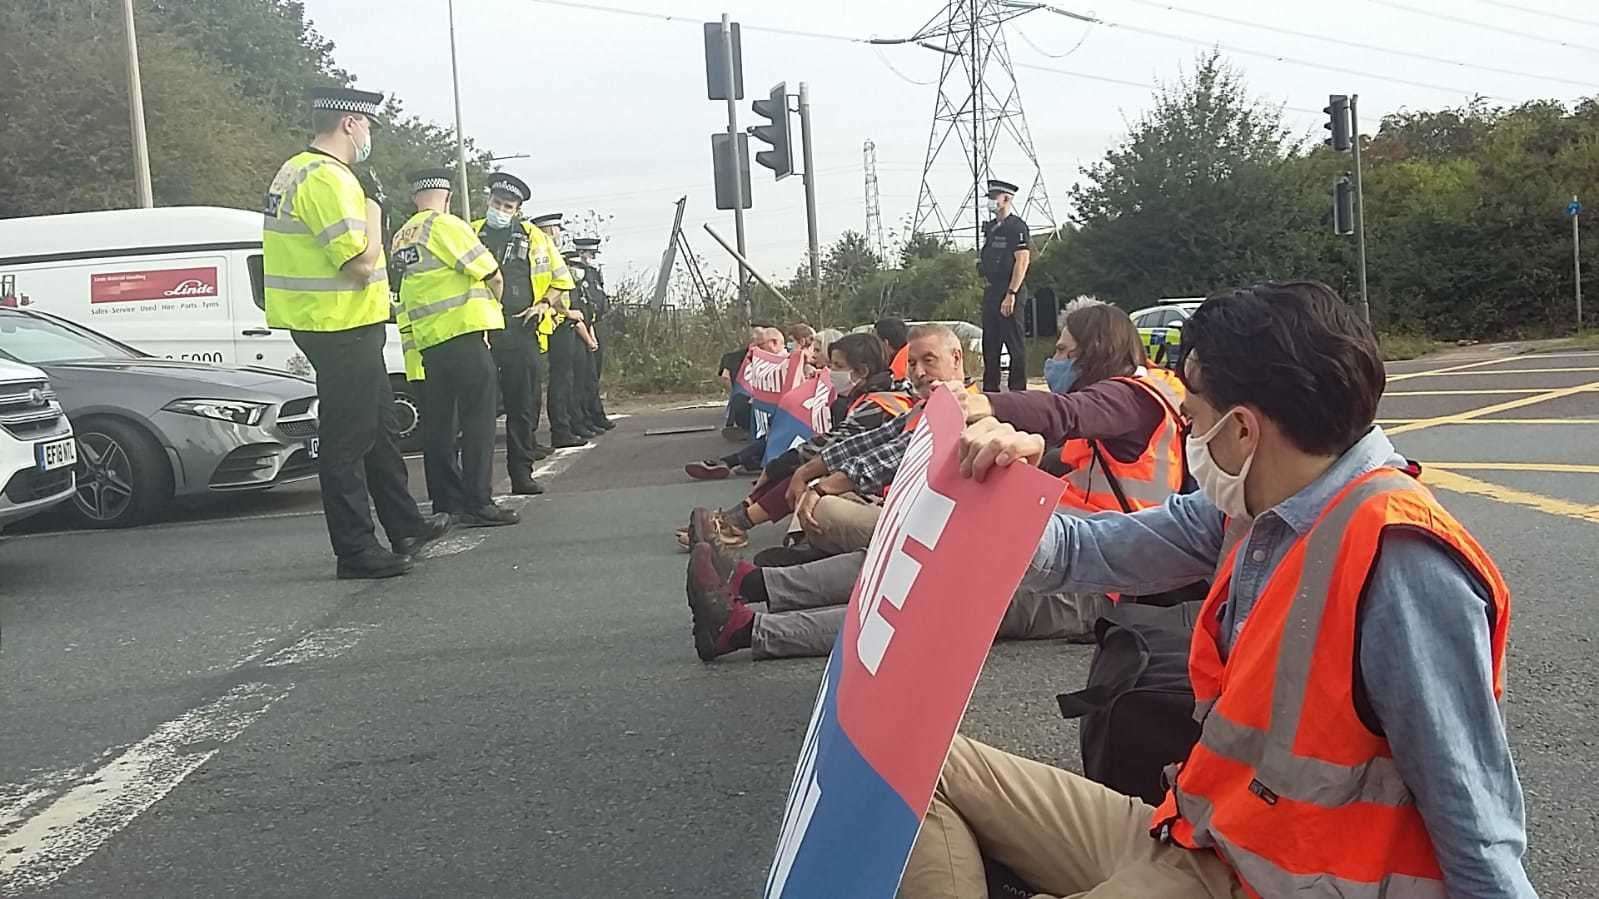 Campaign group Insulate Britain staged a sit-in across various junctions of the M25 yesterday, causing hours of delays. Photo: Insulate Britain